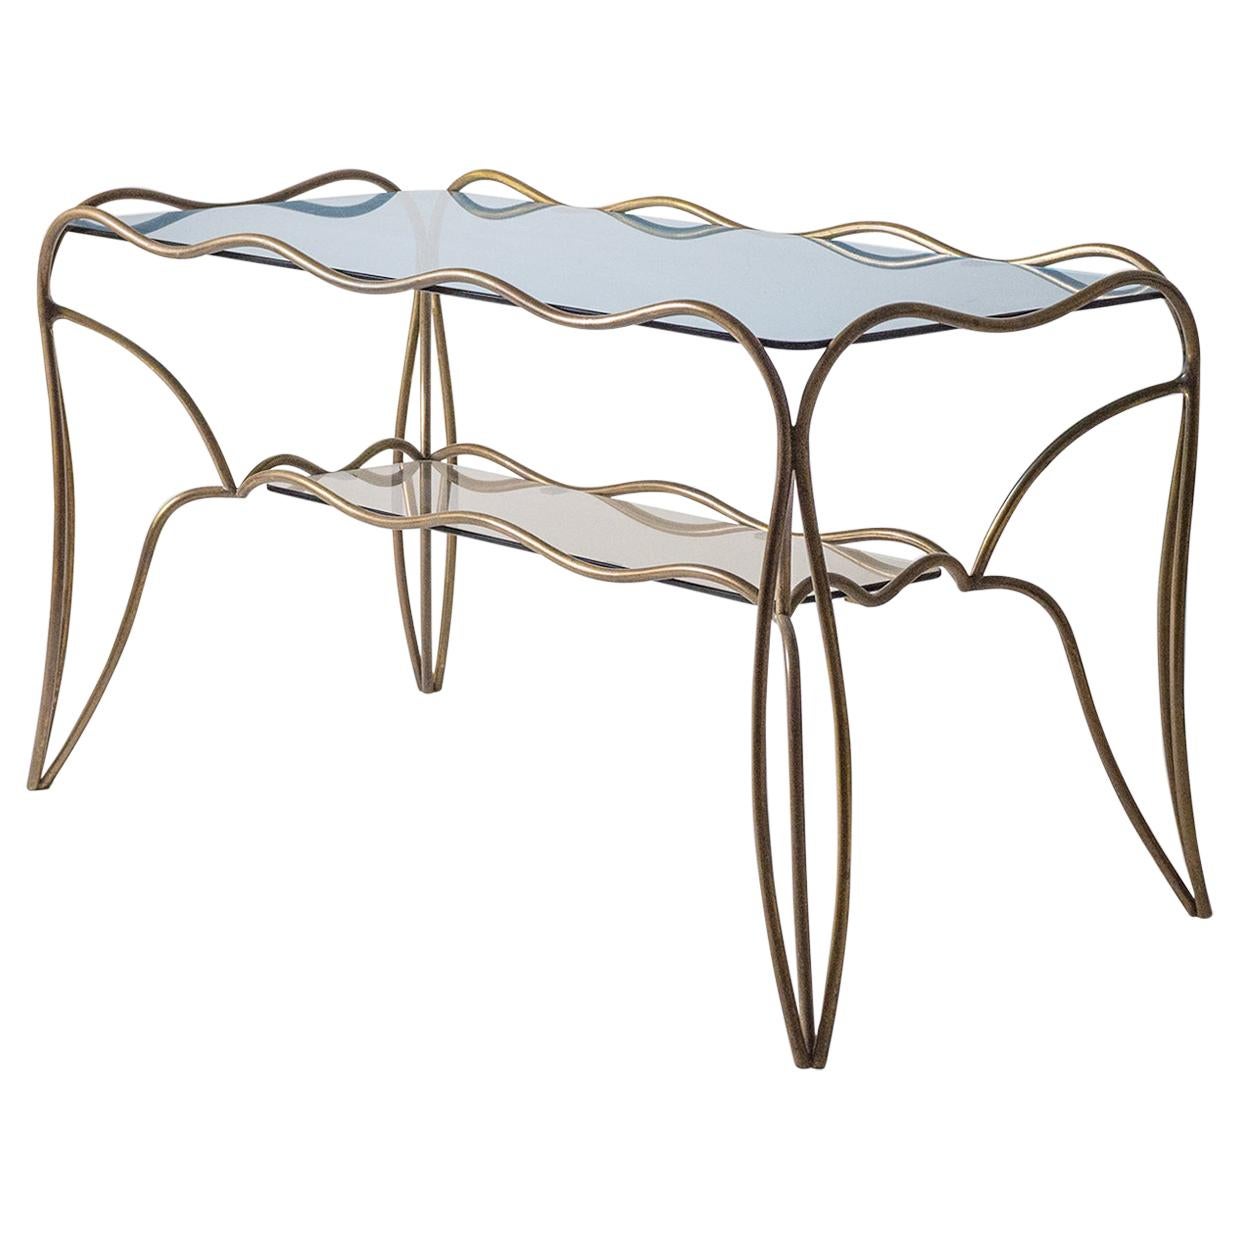 Unique Italian Brass and Colored Glass Cocktail Table, 1950s